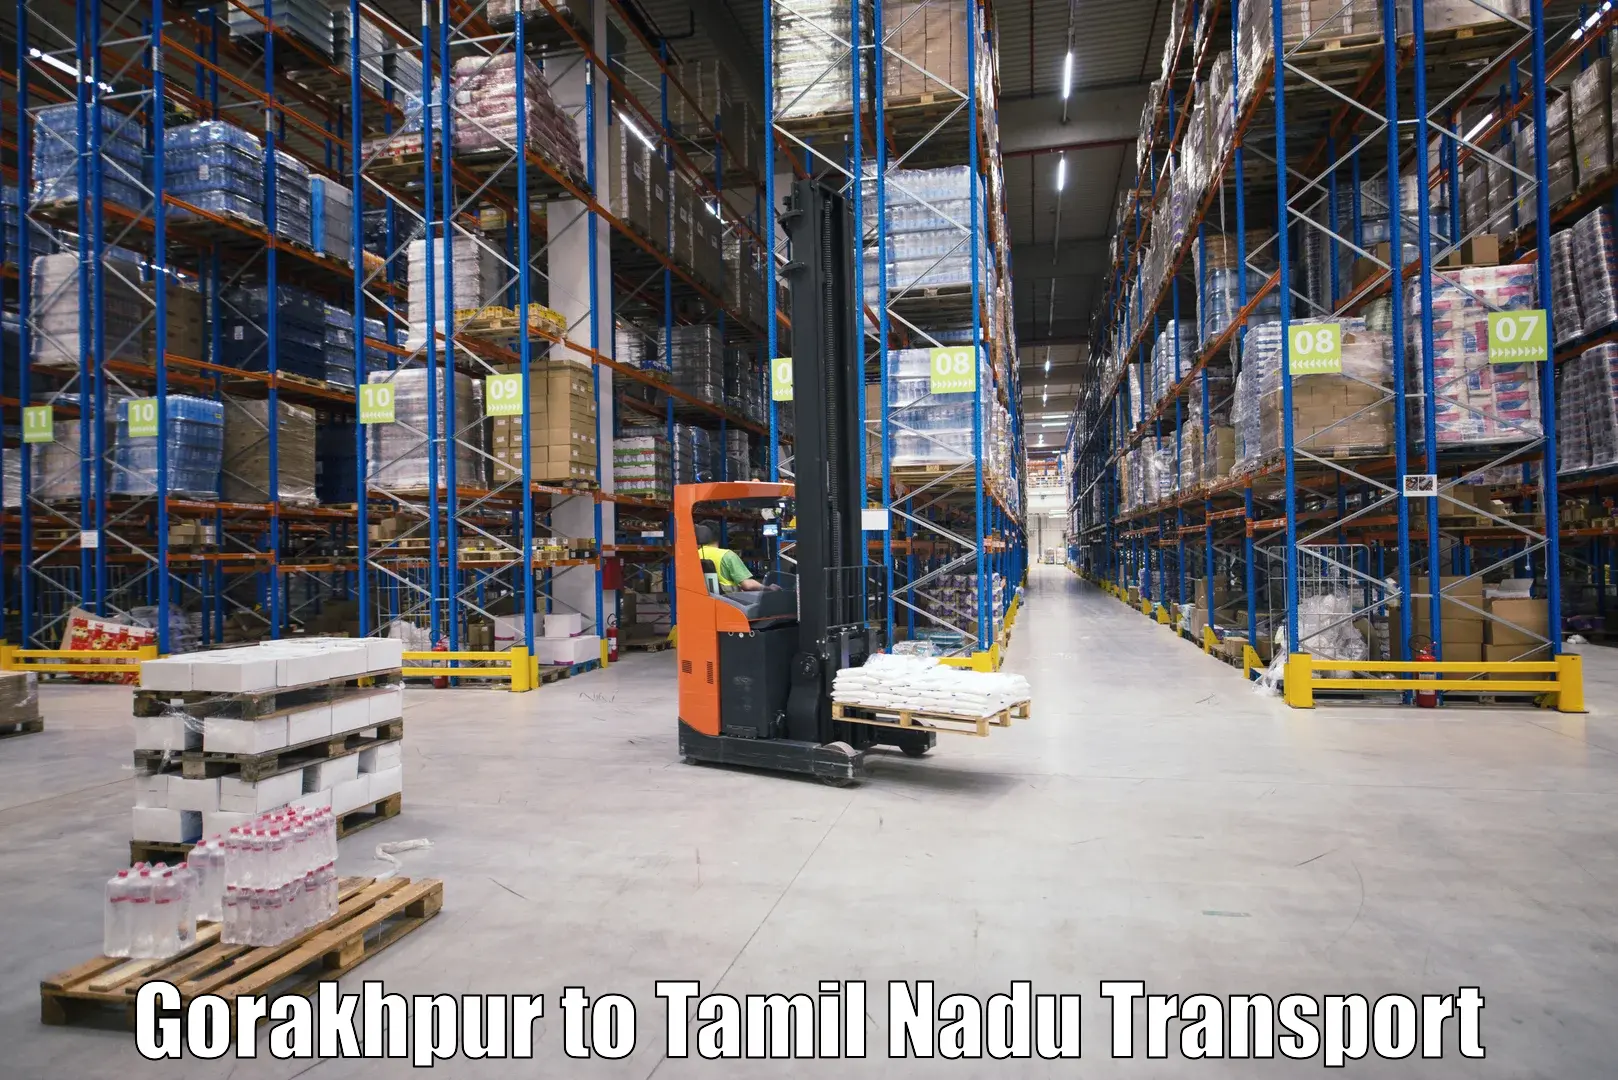 Container transportation services Gorakhpur to Shanmugha Arts Science Technology and Research Academy Thanjavur